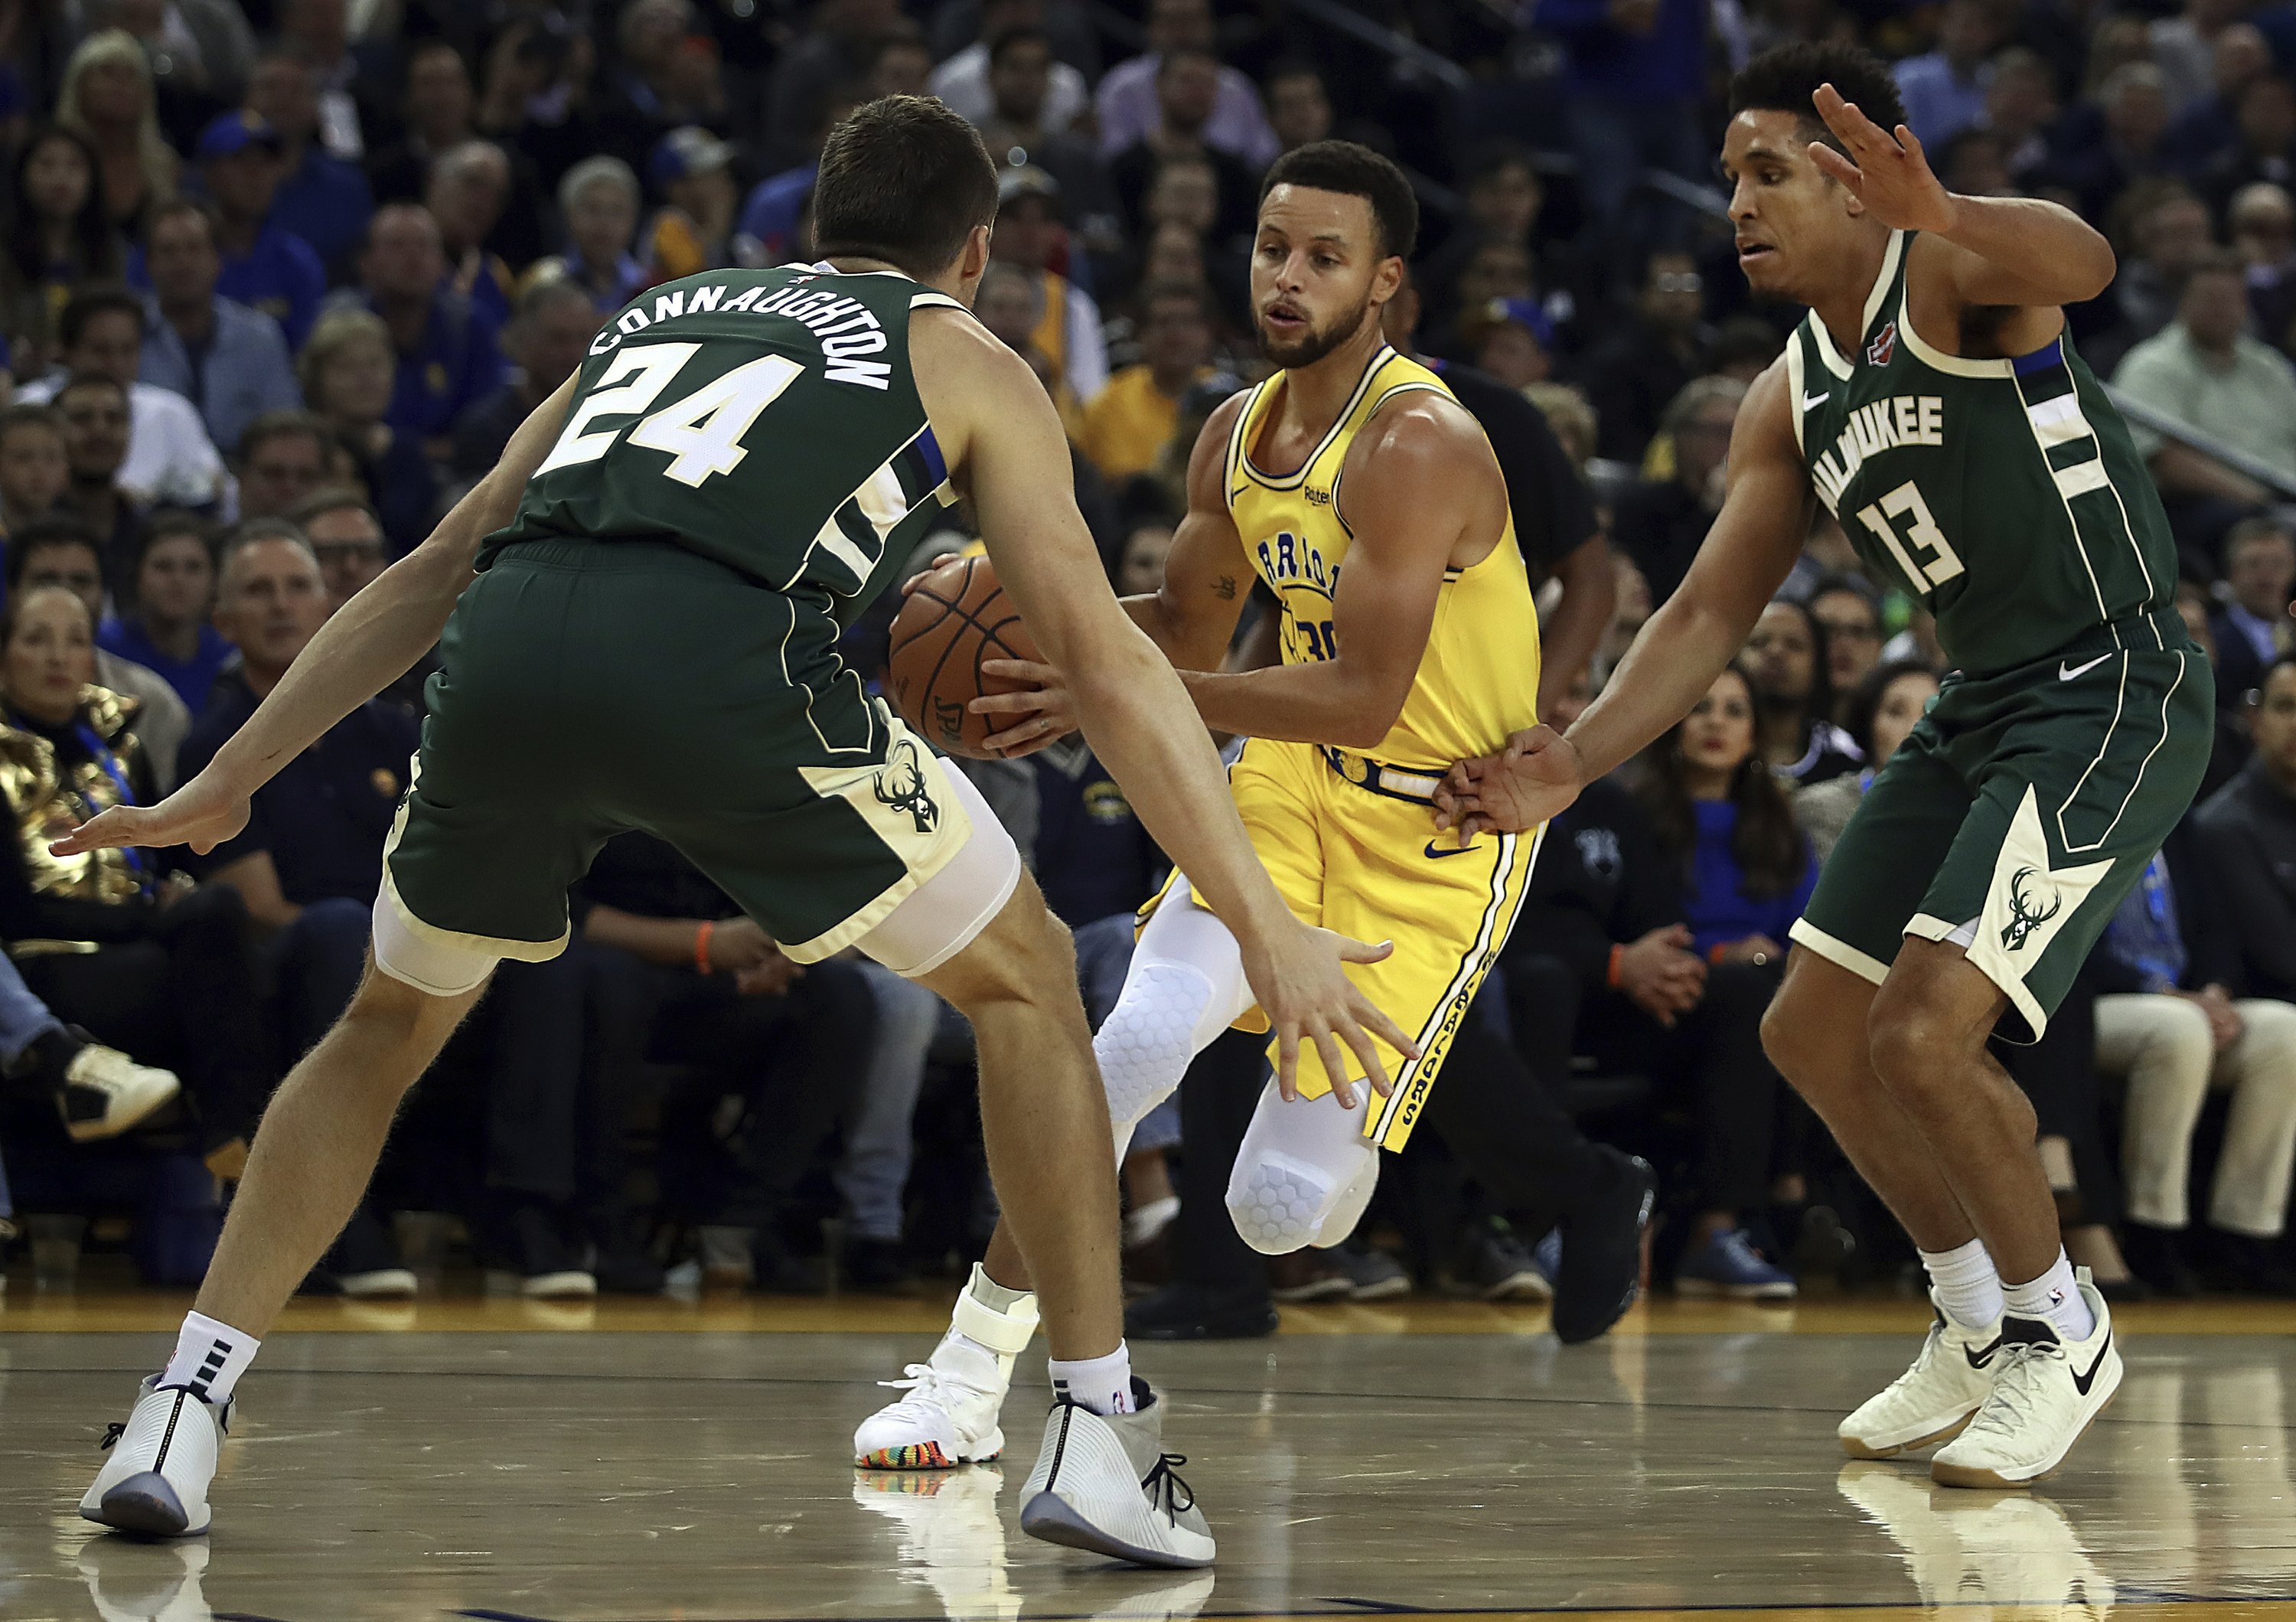 Top scorers face off in Milwaukee-Golden State matchup Thursday